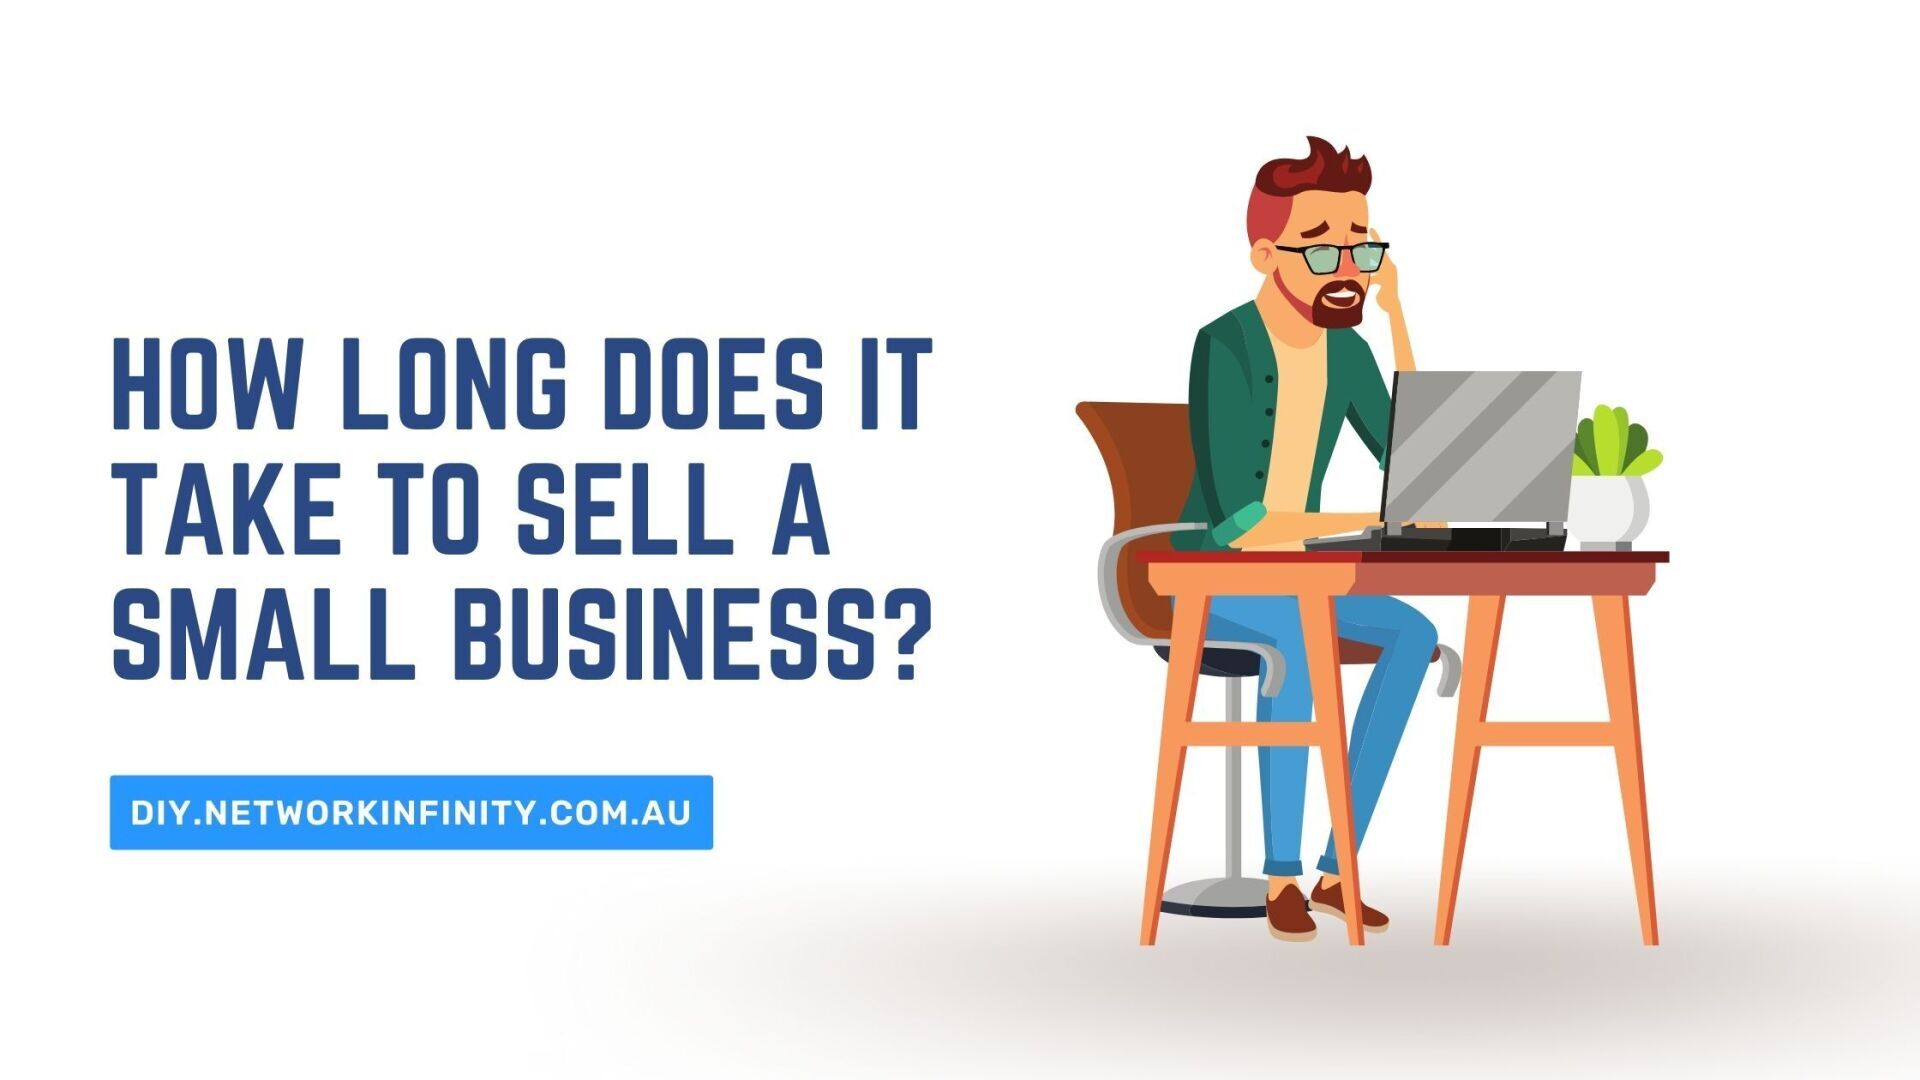 How Long Does It Take To Sell A Small Business?